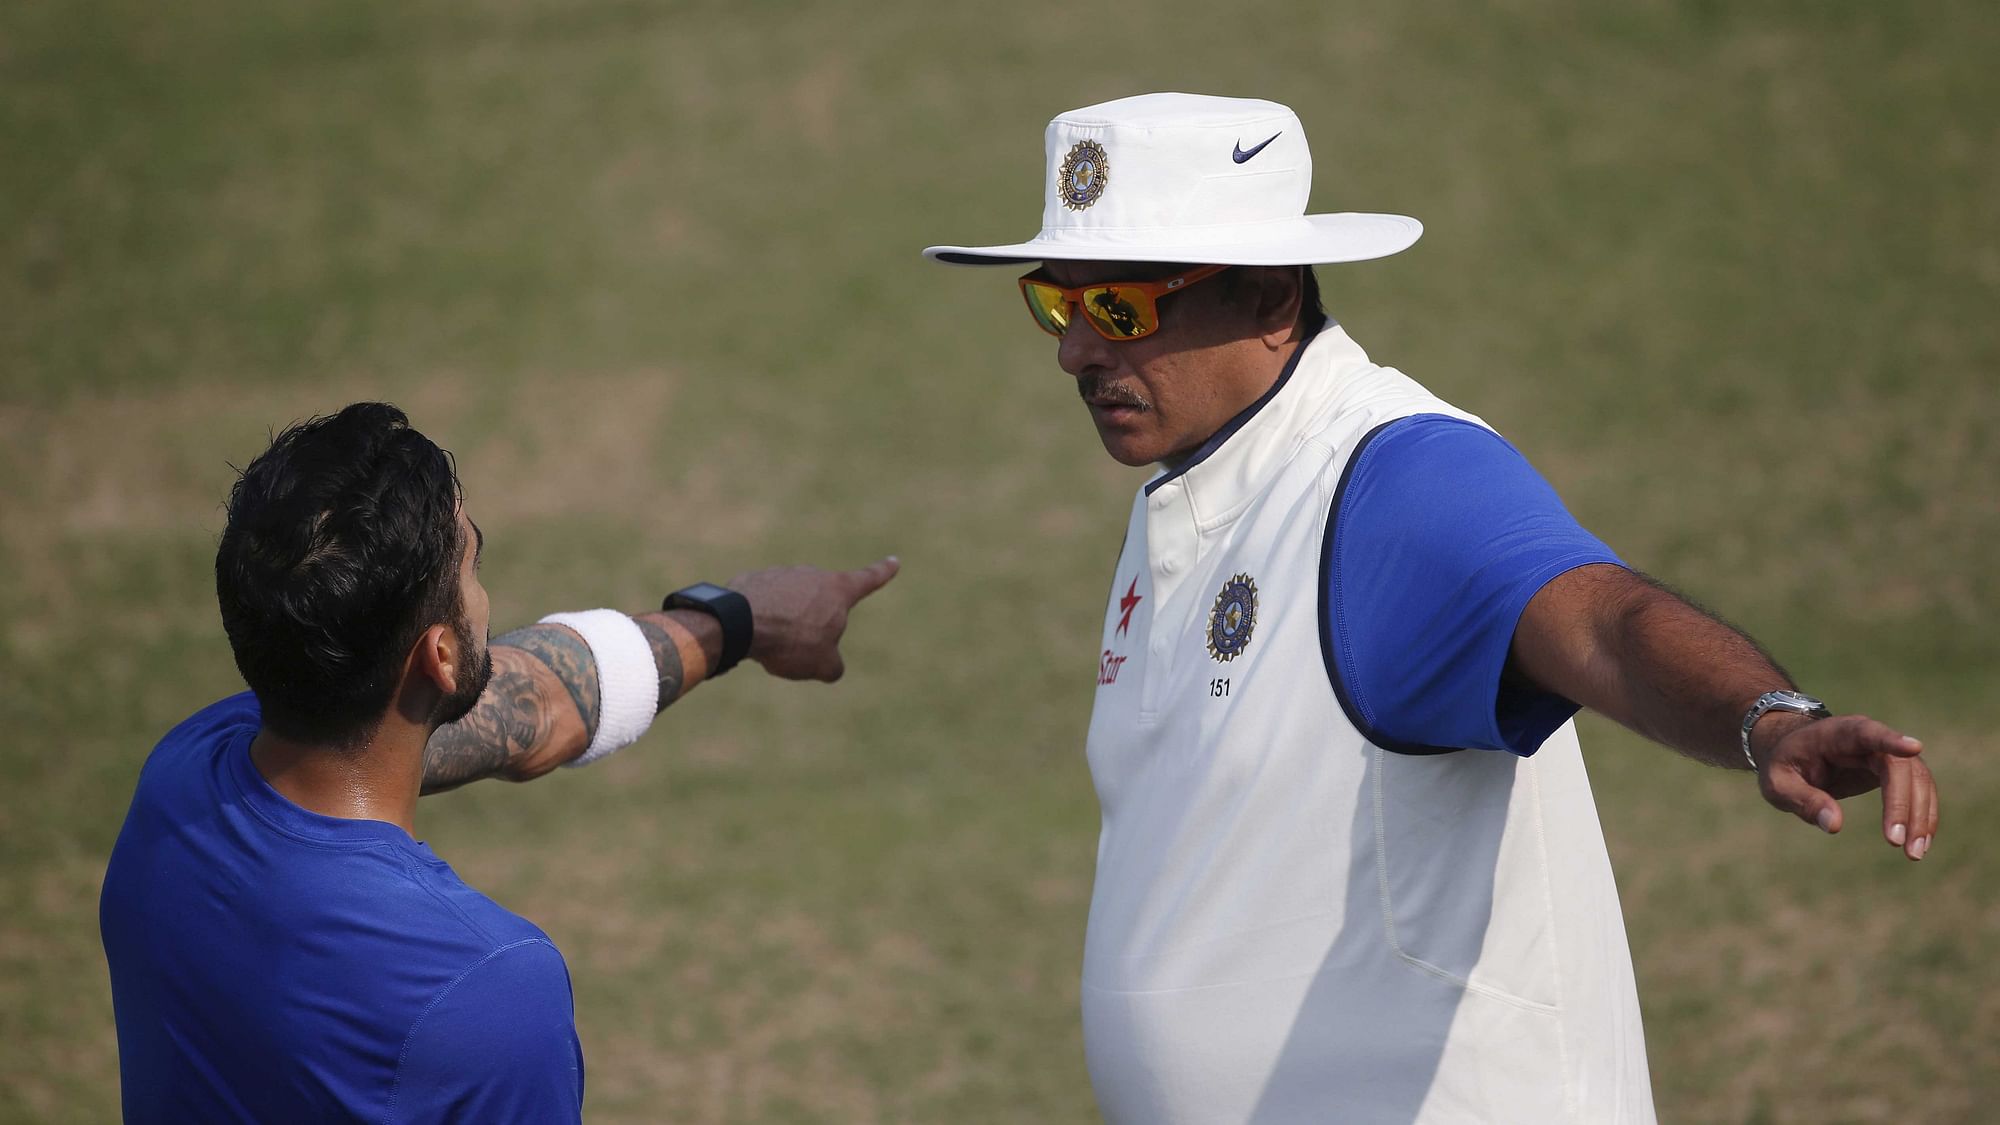 Ravi Shastri had Bharat Arun as the bowling coach in his time as Team Director as well